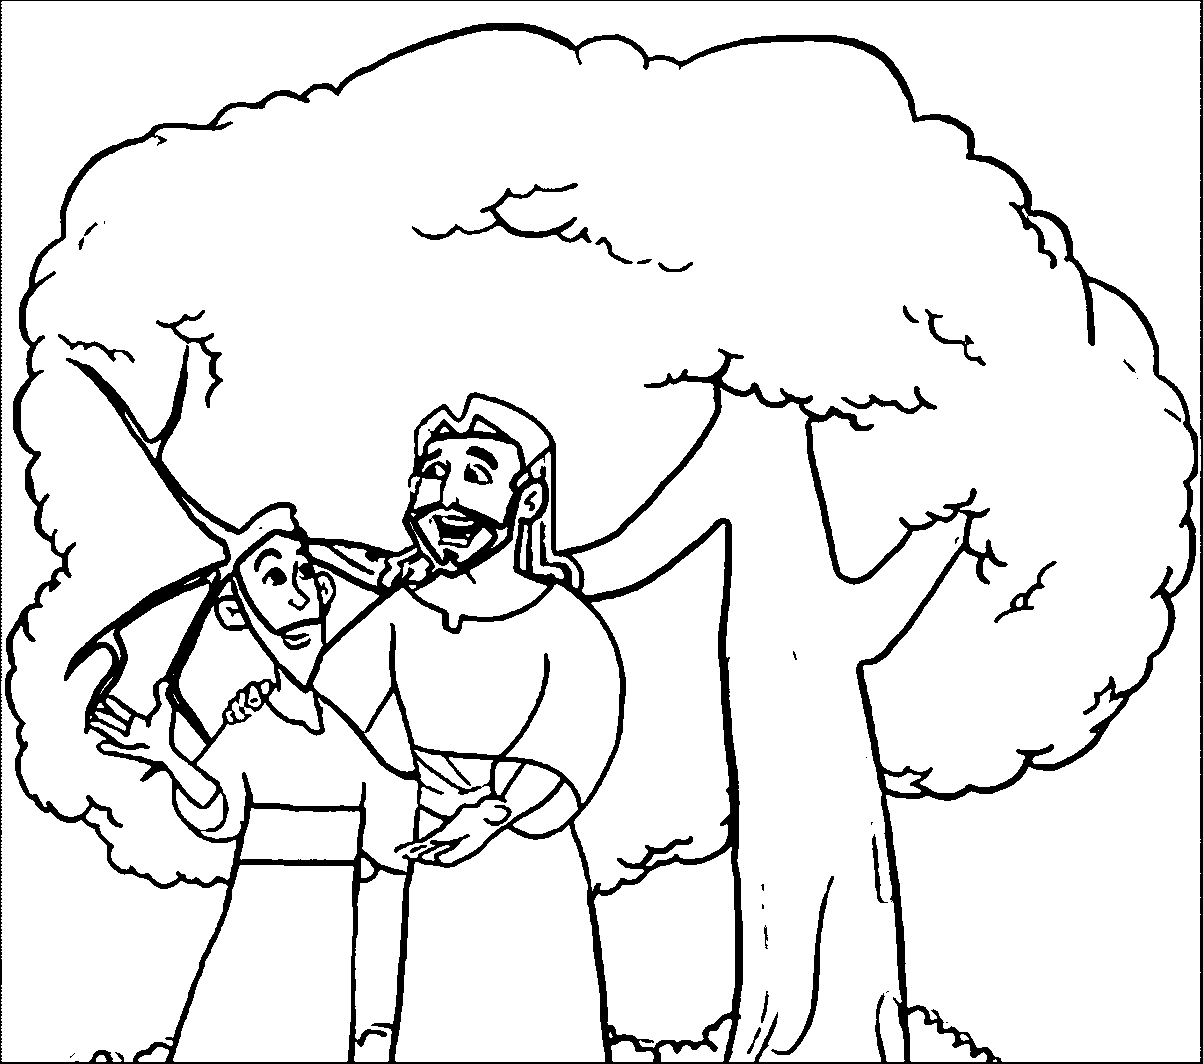 Download Zacchaeus Coloring Page Printable - Coloring Home